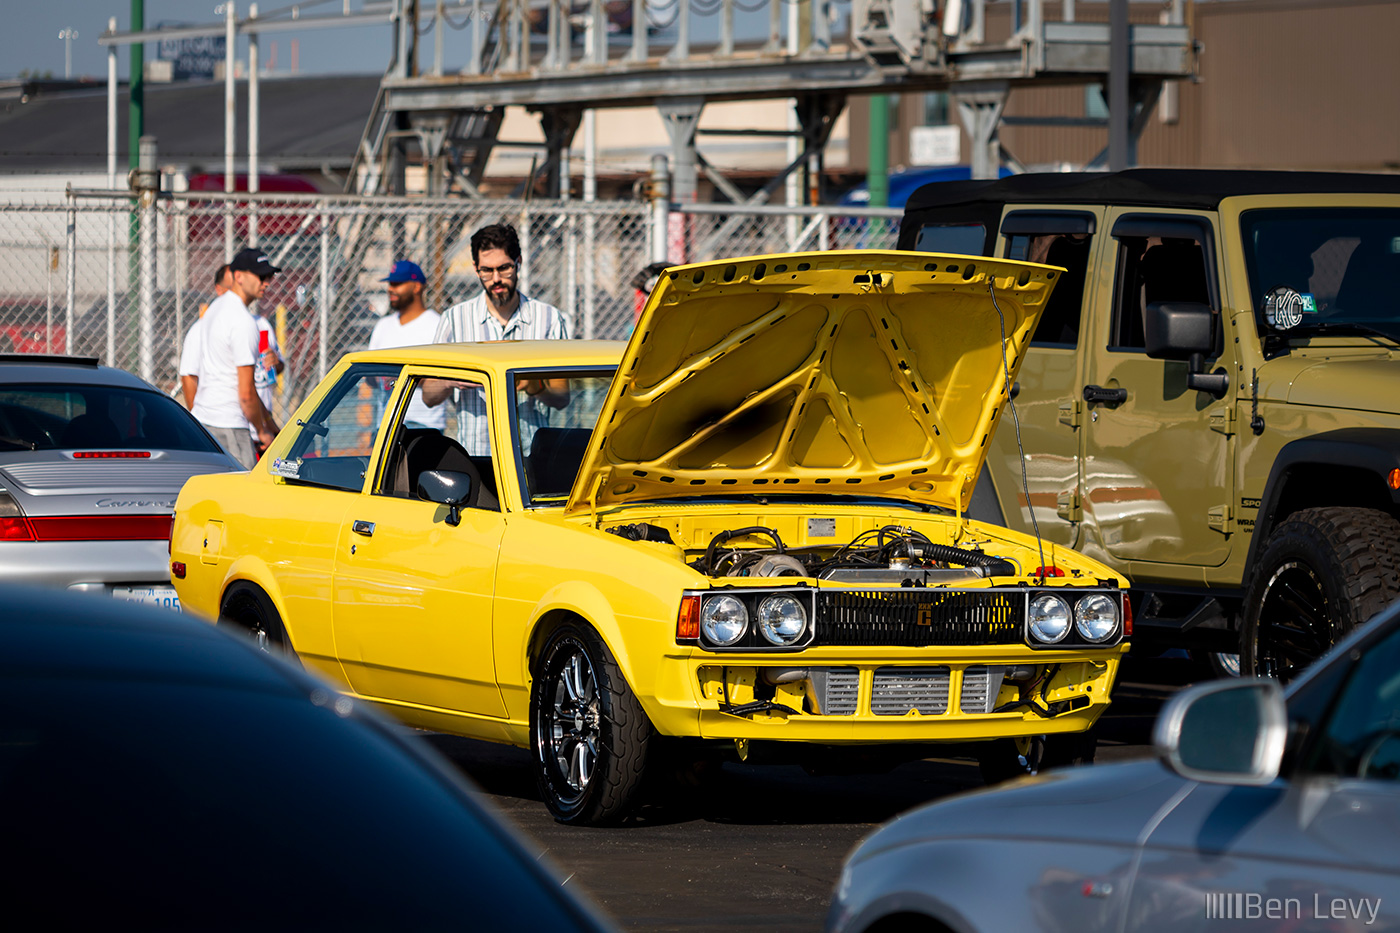 Yellow Toyota Corolla Coupe at STA-BIL/303 Product Cars & Coffee